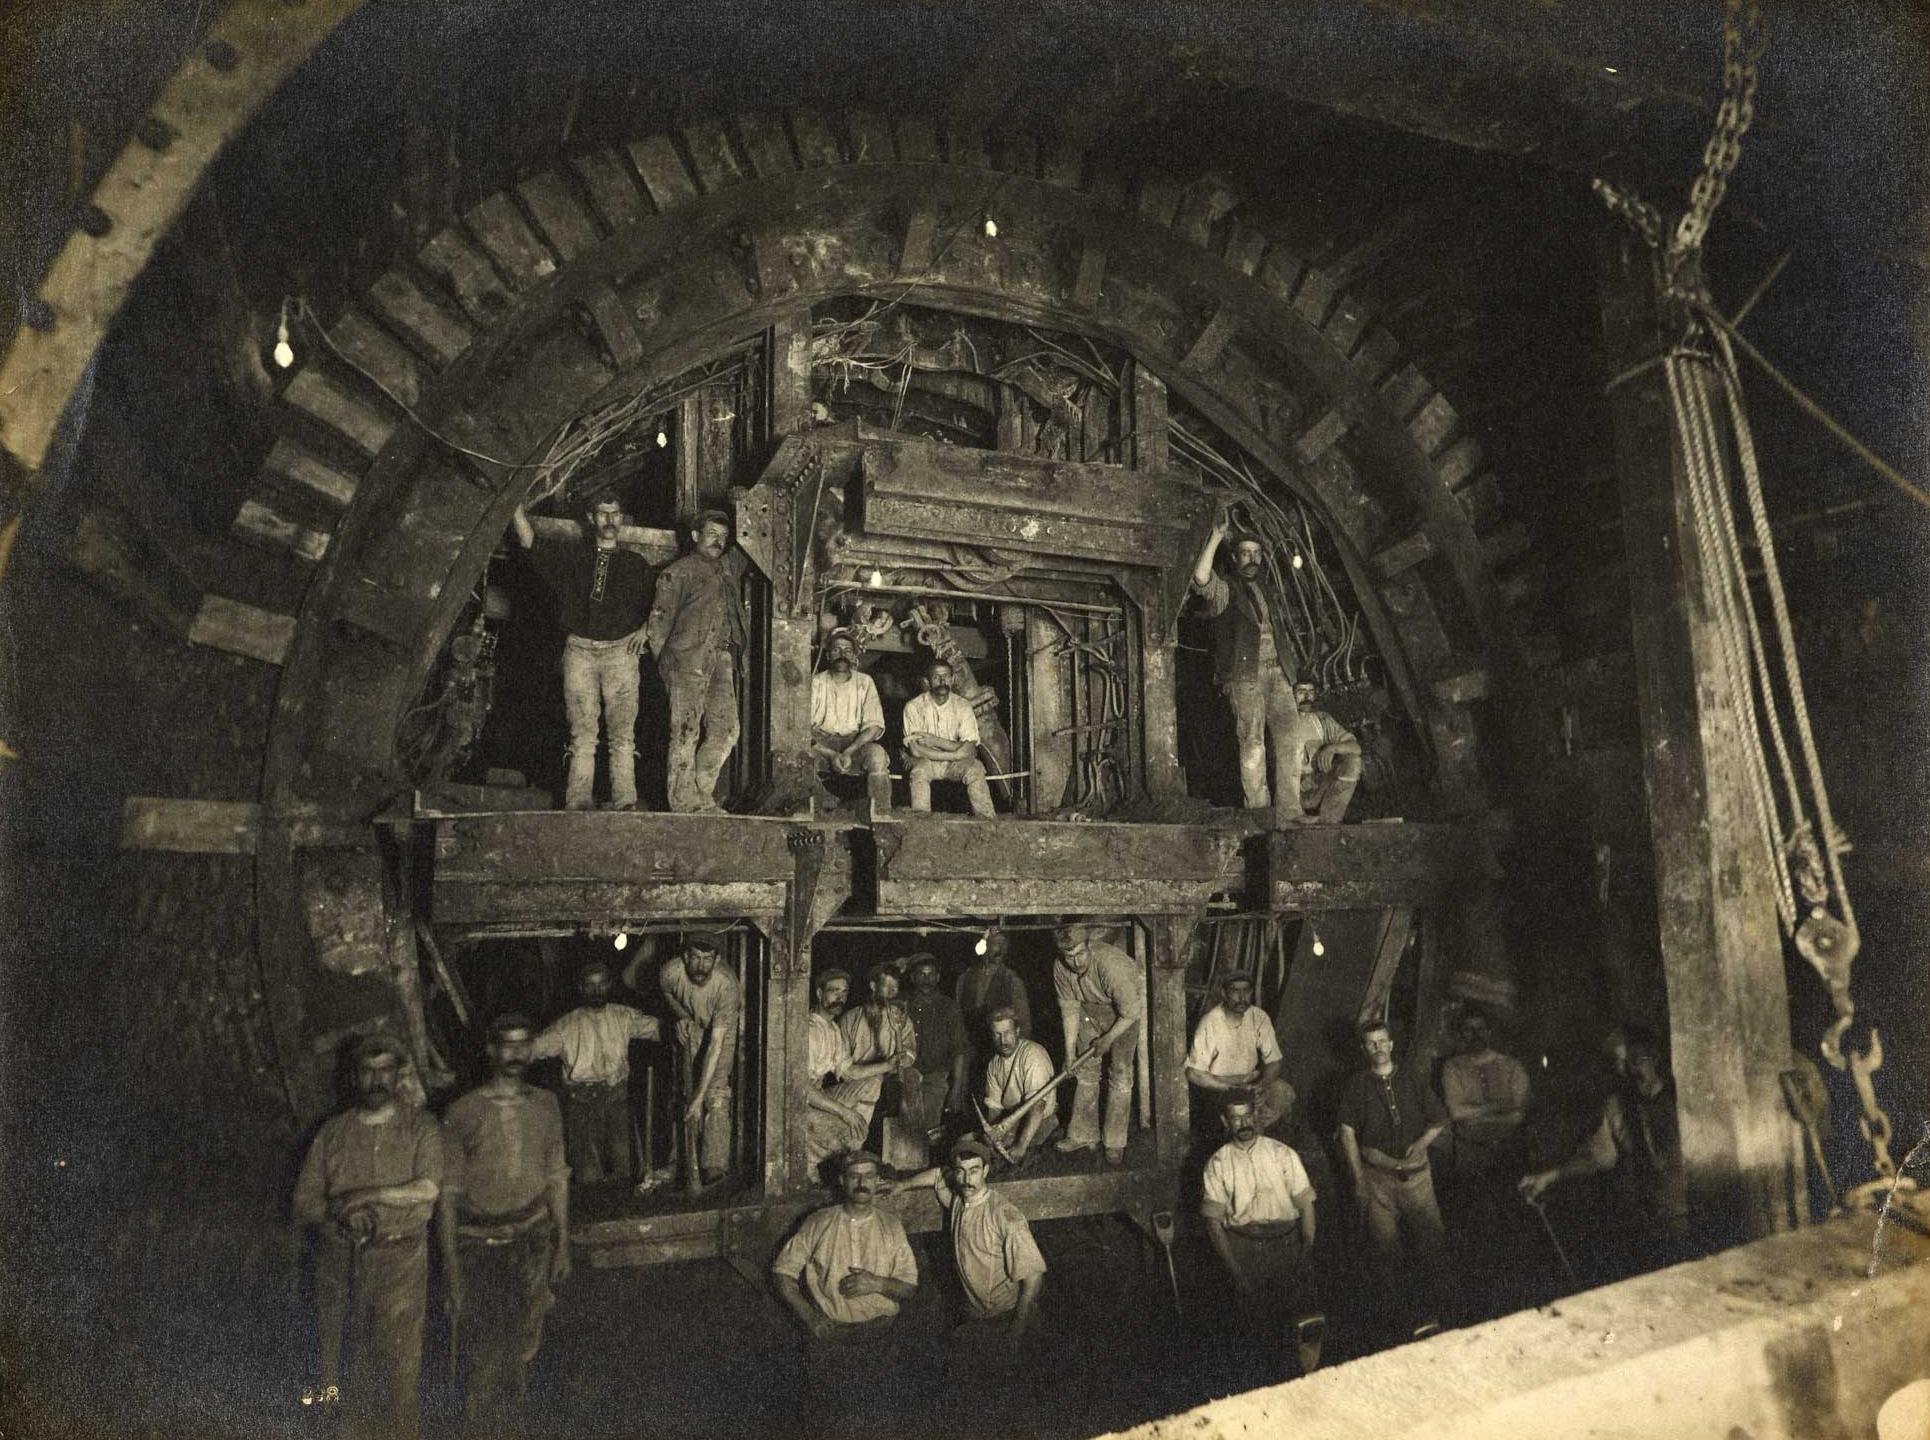 Men at work on the Central Line of the London Underground, 1898